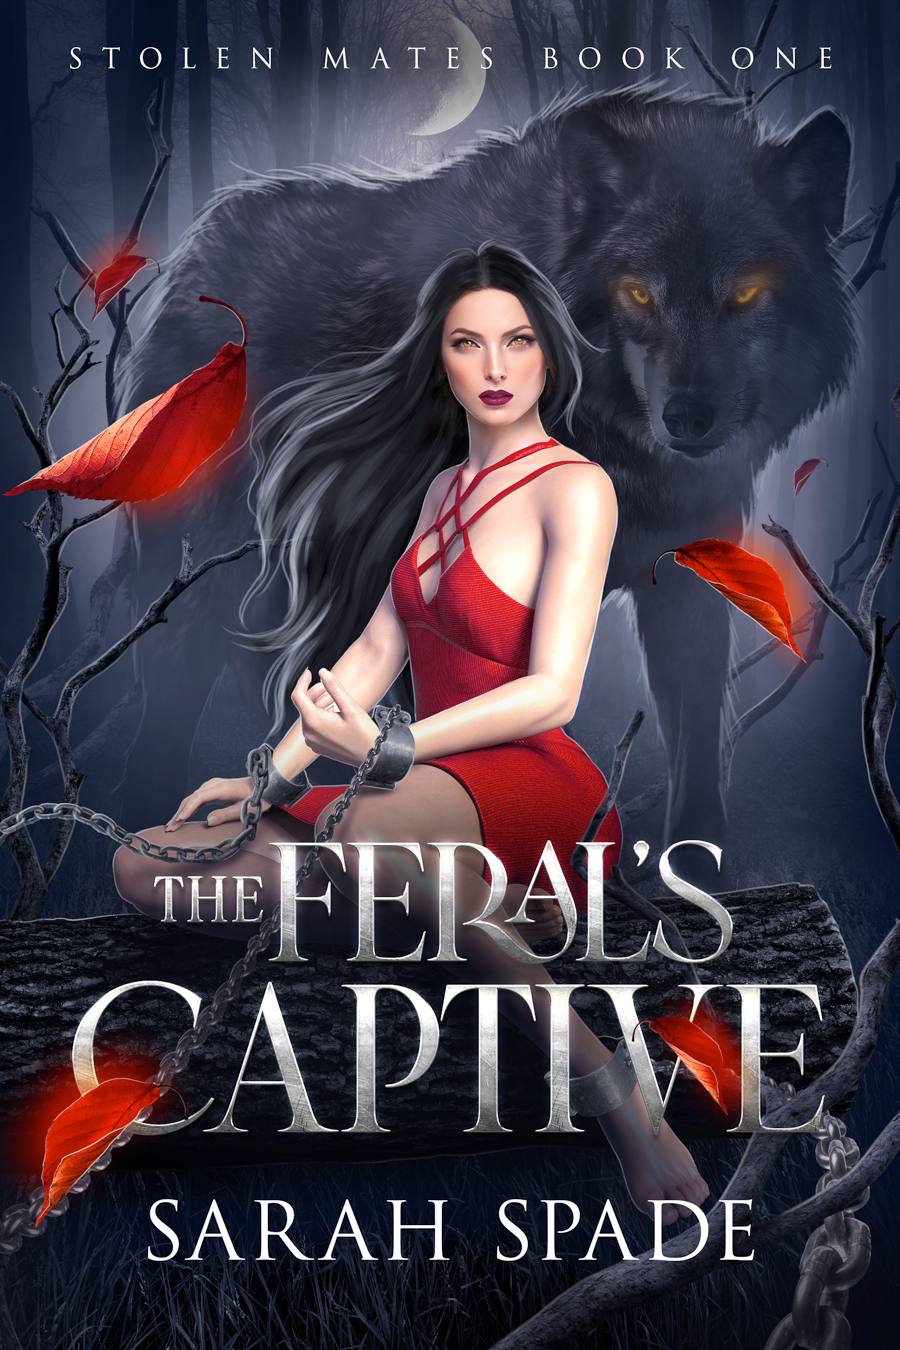 The Feral’s Captive by Sarah Spade